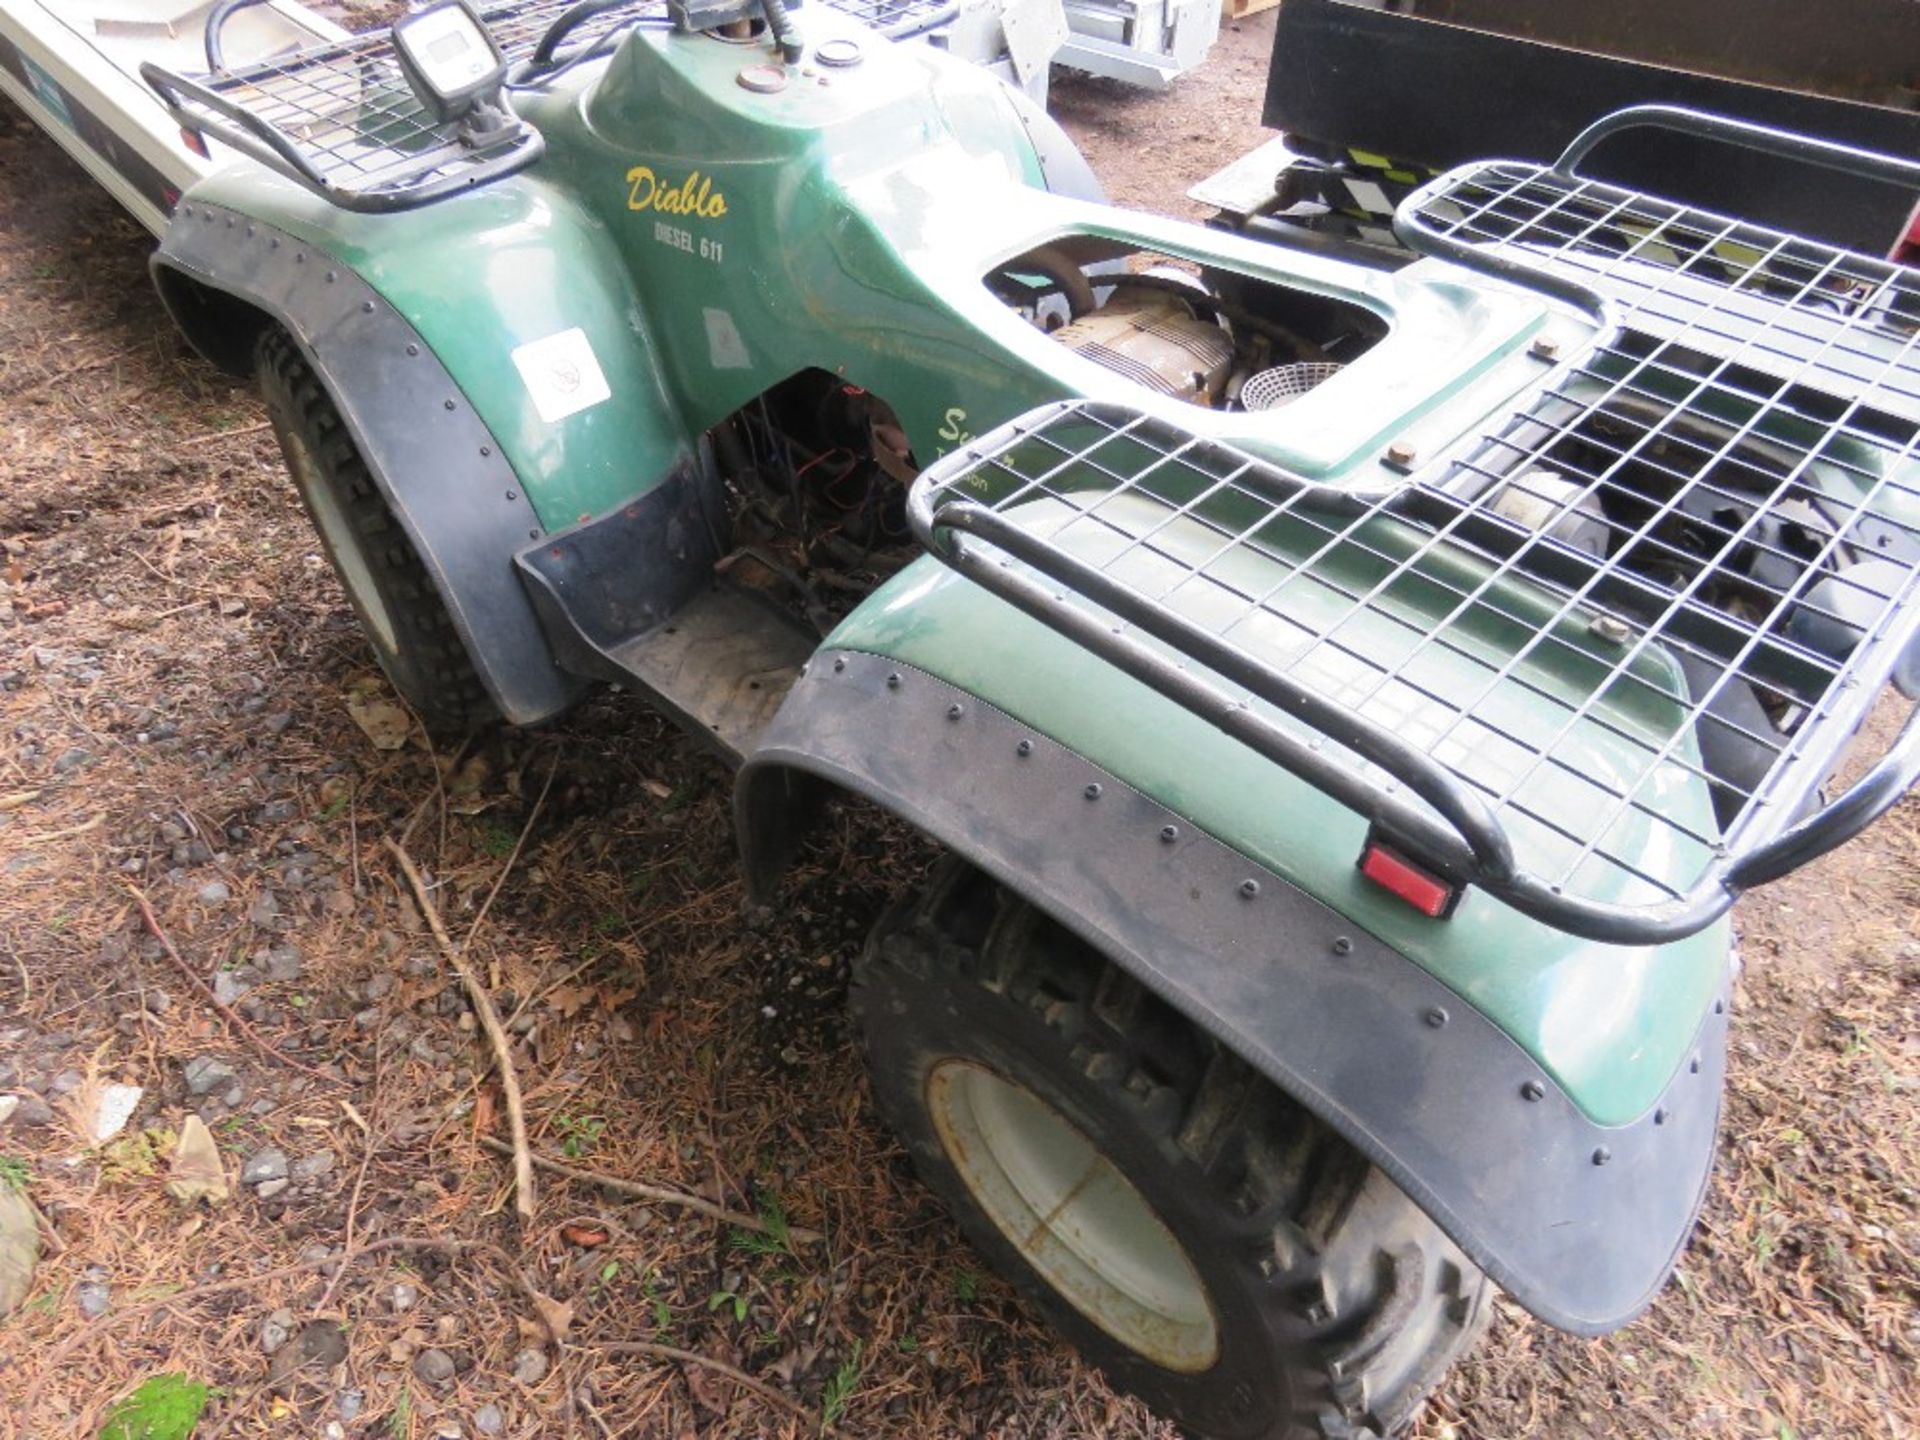 DIABLO DIESEL ENGINED 2WD QUAD BIKE. WHEN TESTED WAS SEEN TO TURN OVER BUT NOT STARTING. THIS LOT - Image 3 of 5